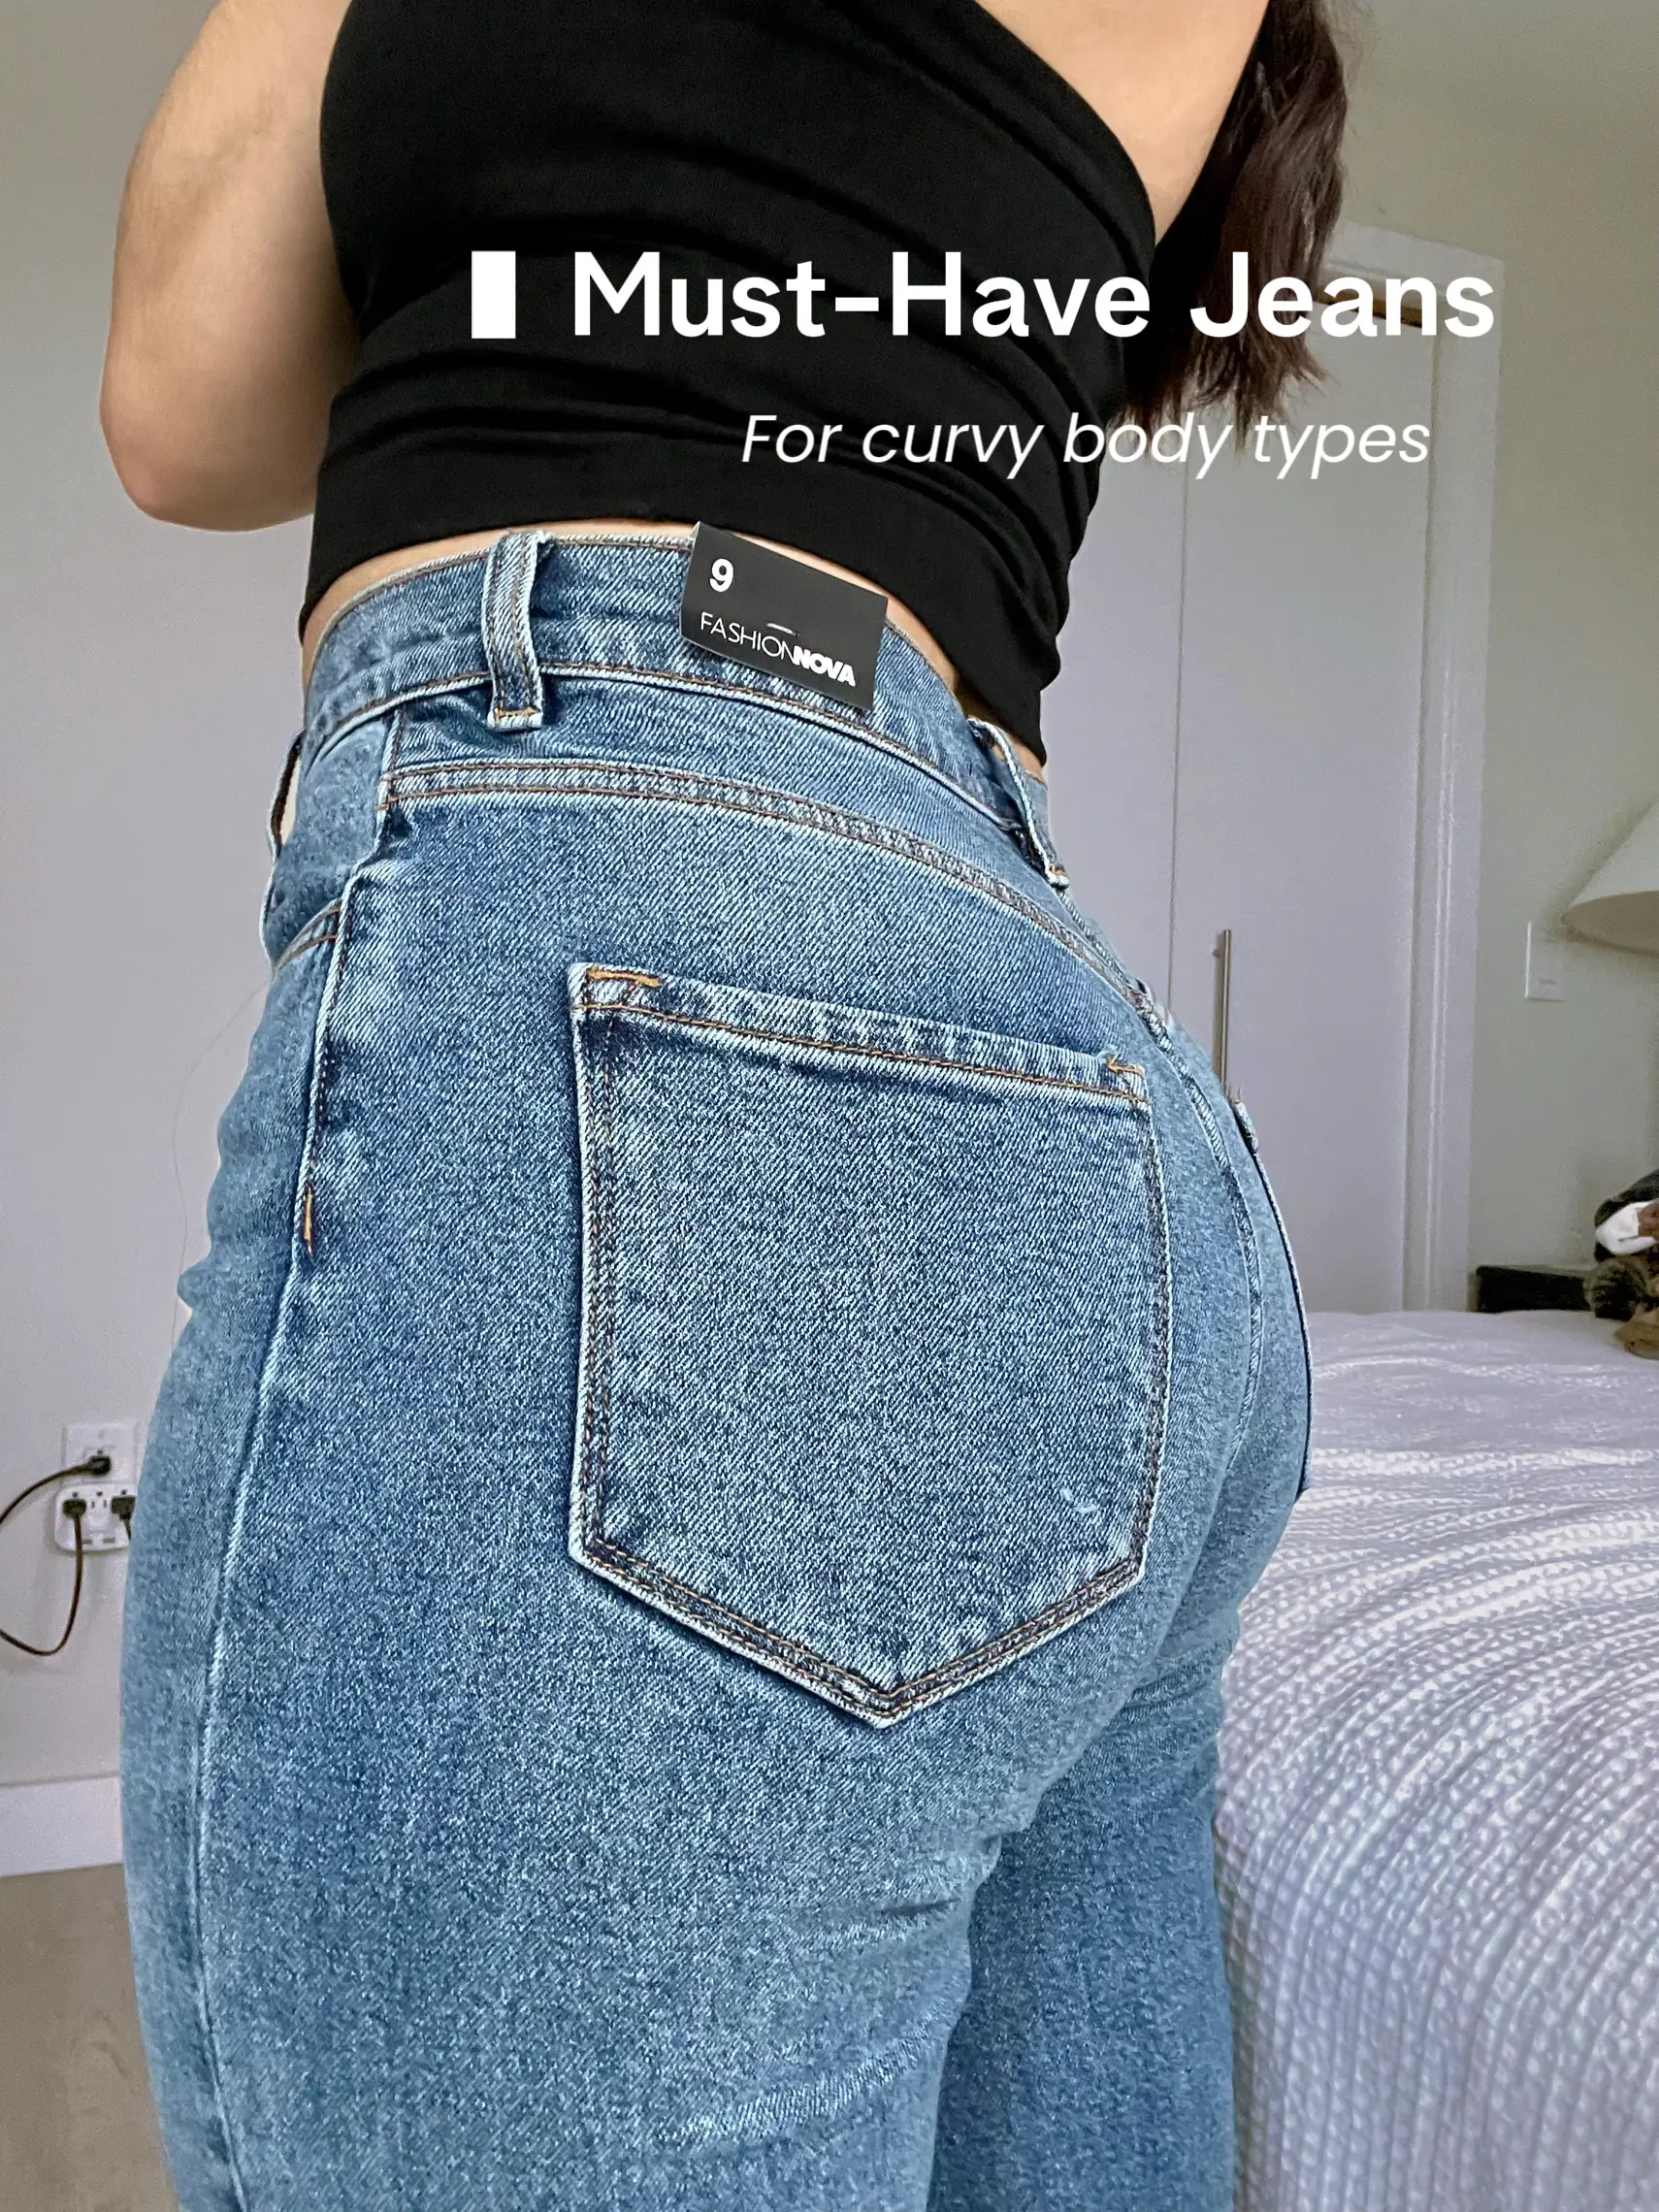 MOM JEANS 4 CURVES 🍐, Gallery posted by tonnyann